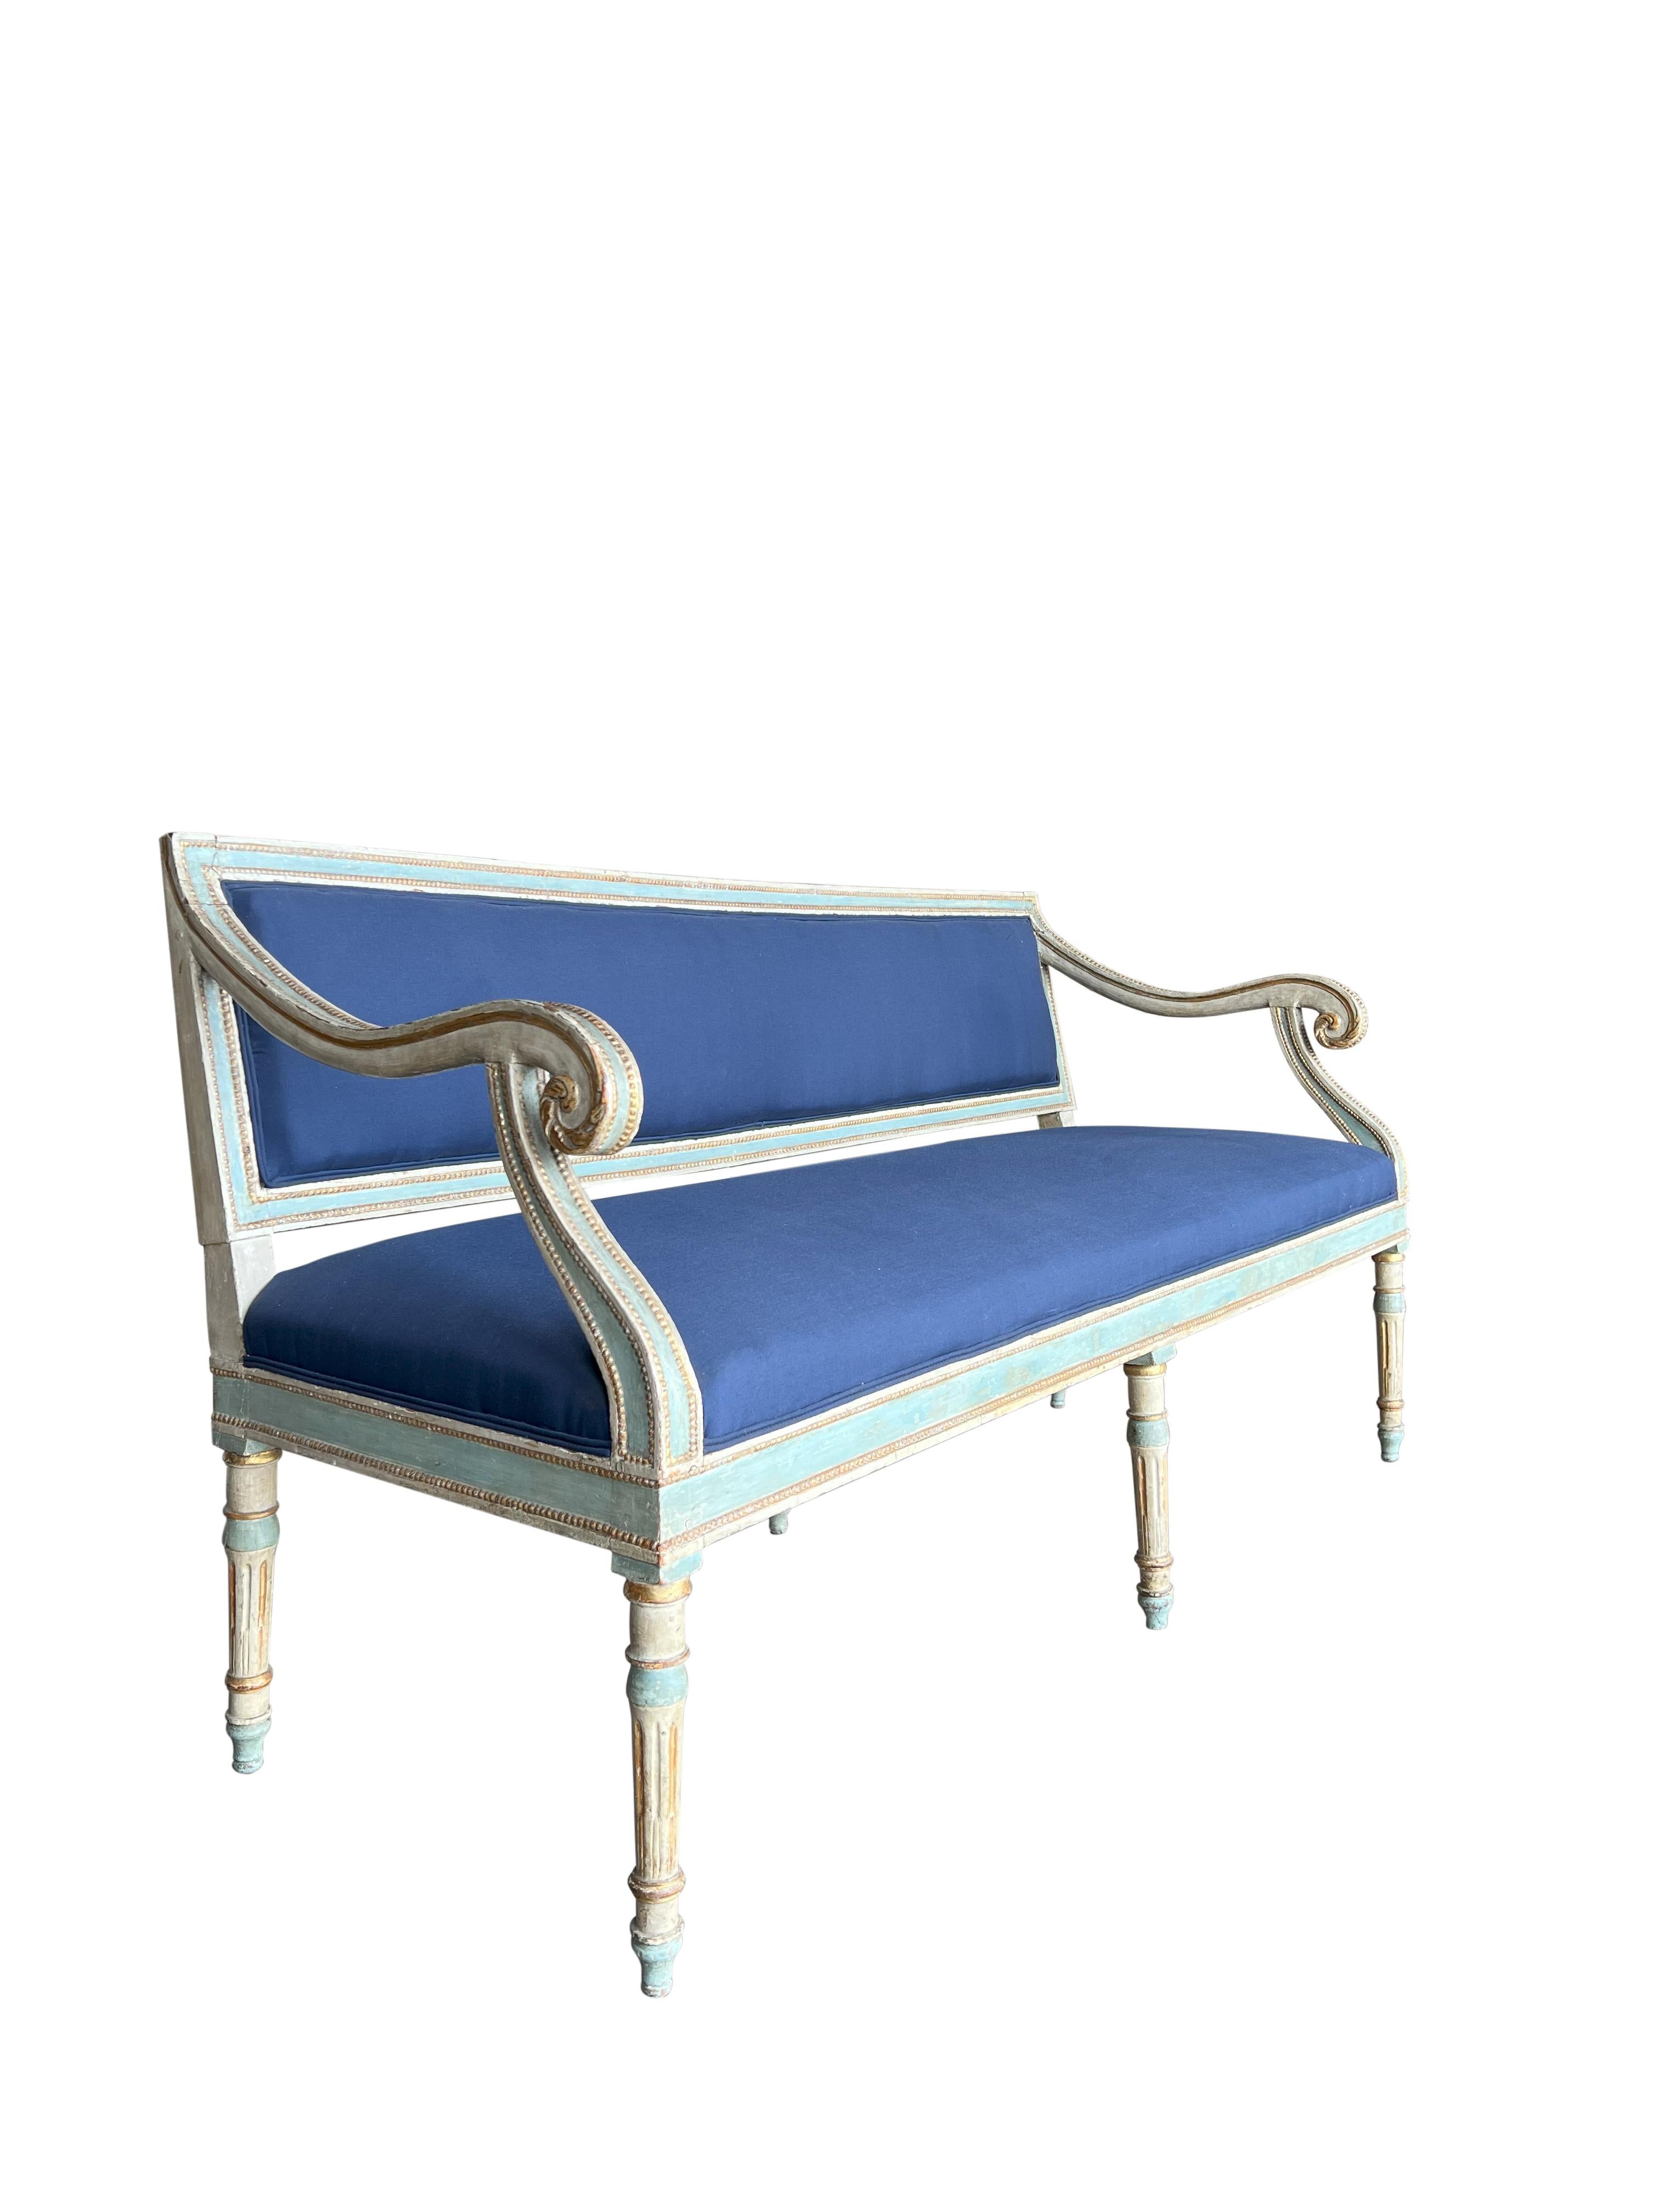 19th Century Italian Louis XVI Style Painted and Gold Gilt Bench Settee Ca 1820 In Good Condition For Sale In Encinitas, CA